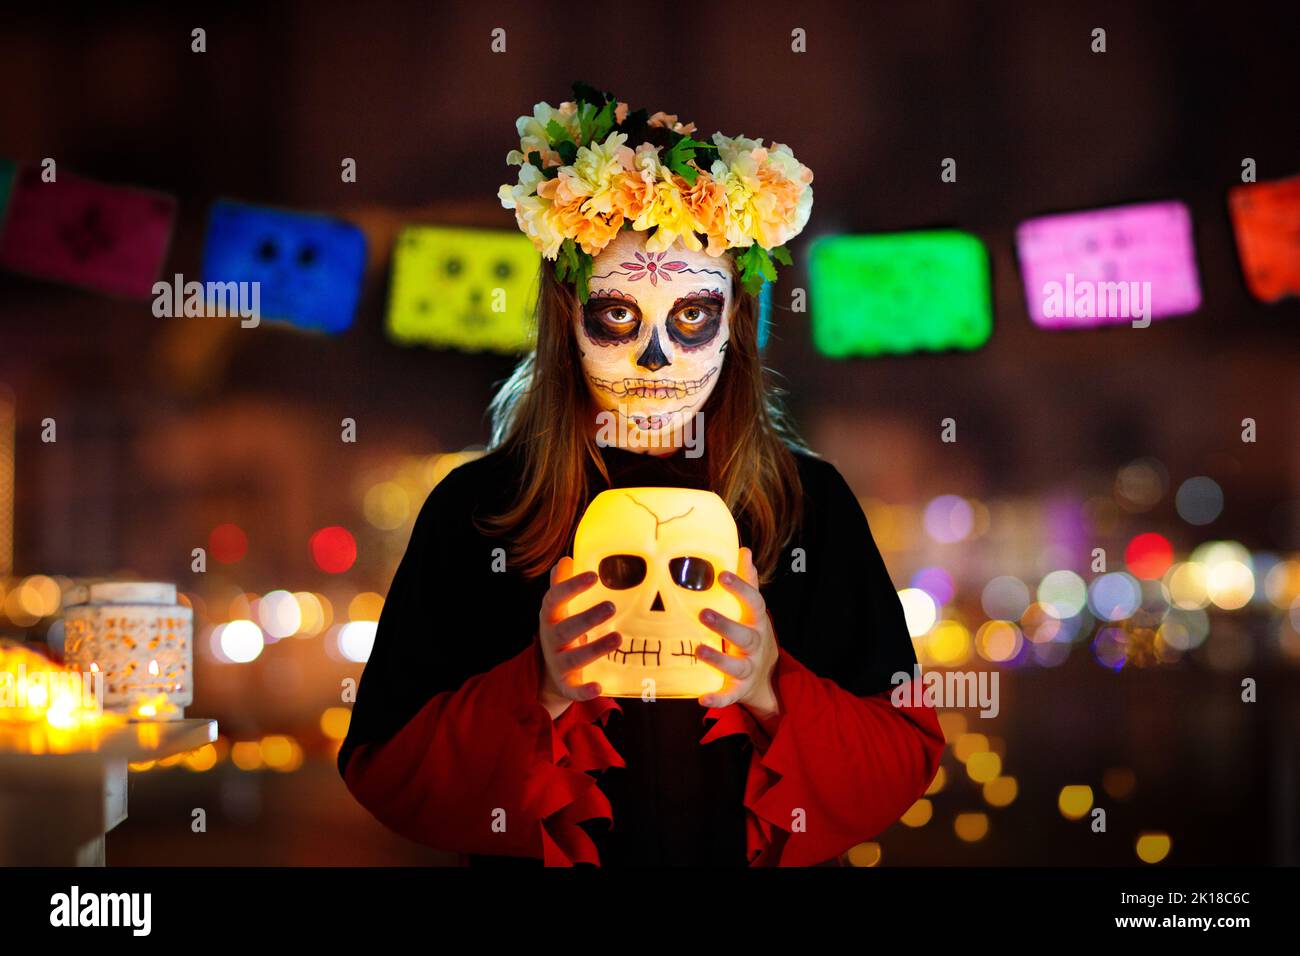 Dia de los muertos celebration. Traditional Day of the Dead party. Halloween in Mexico. Mexican girl in traditional make up and Catrina costume with a Stock Photo